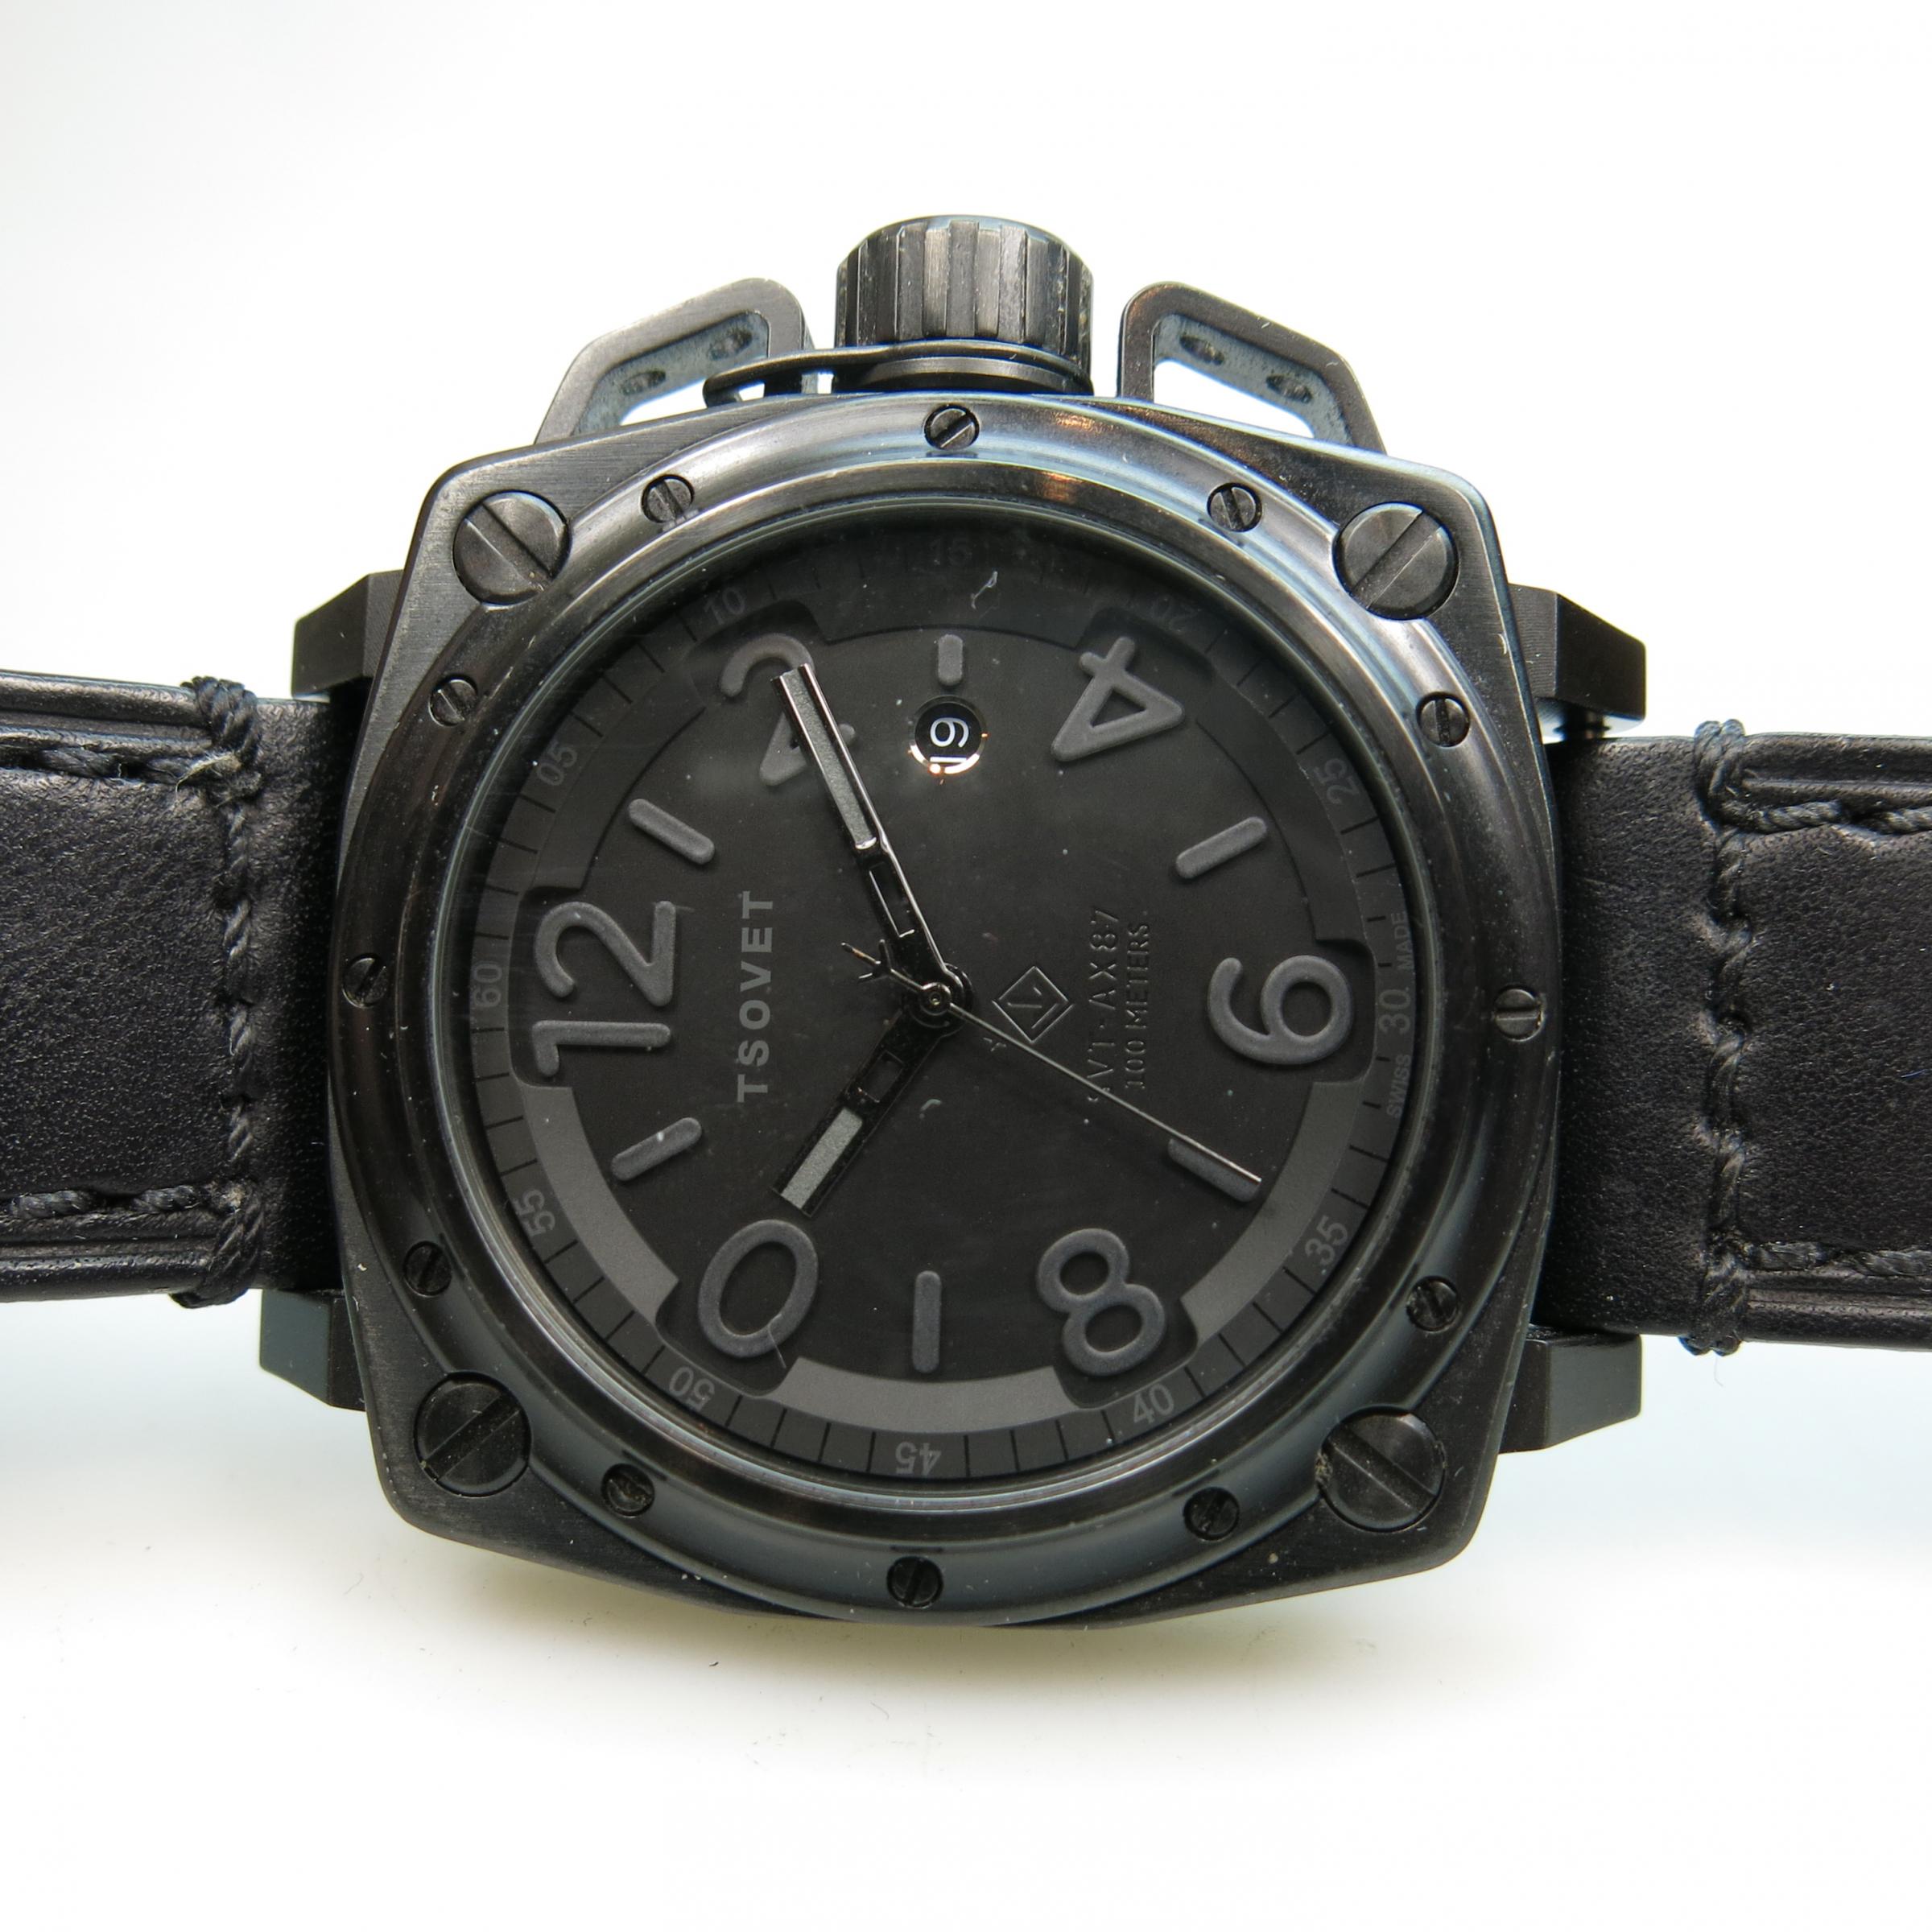 Tsovet 'All-Black' Wristwatch, With Date